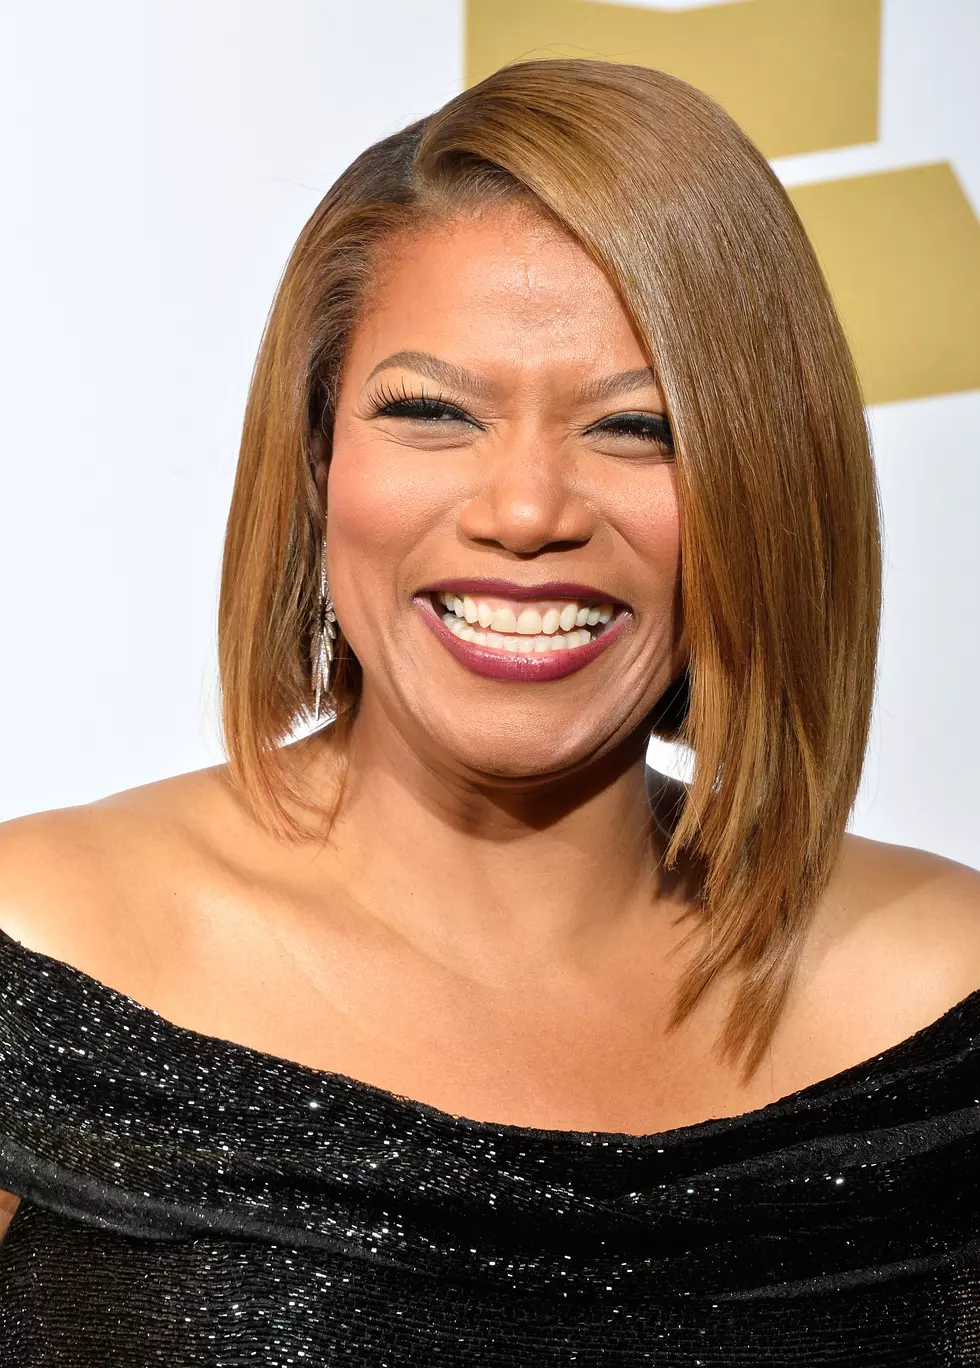 Queen Latifah Cancels Bill Cosby’s Appearance On Her Show